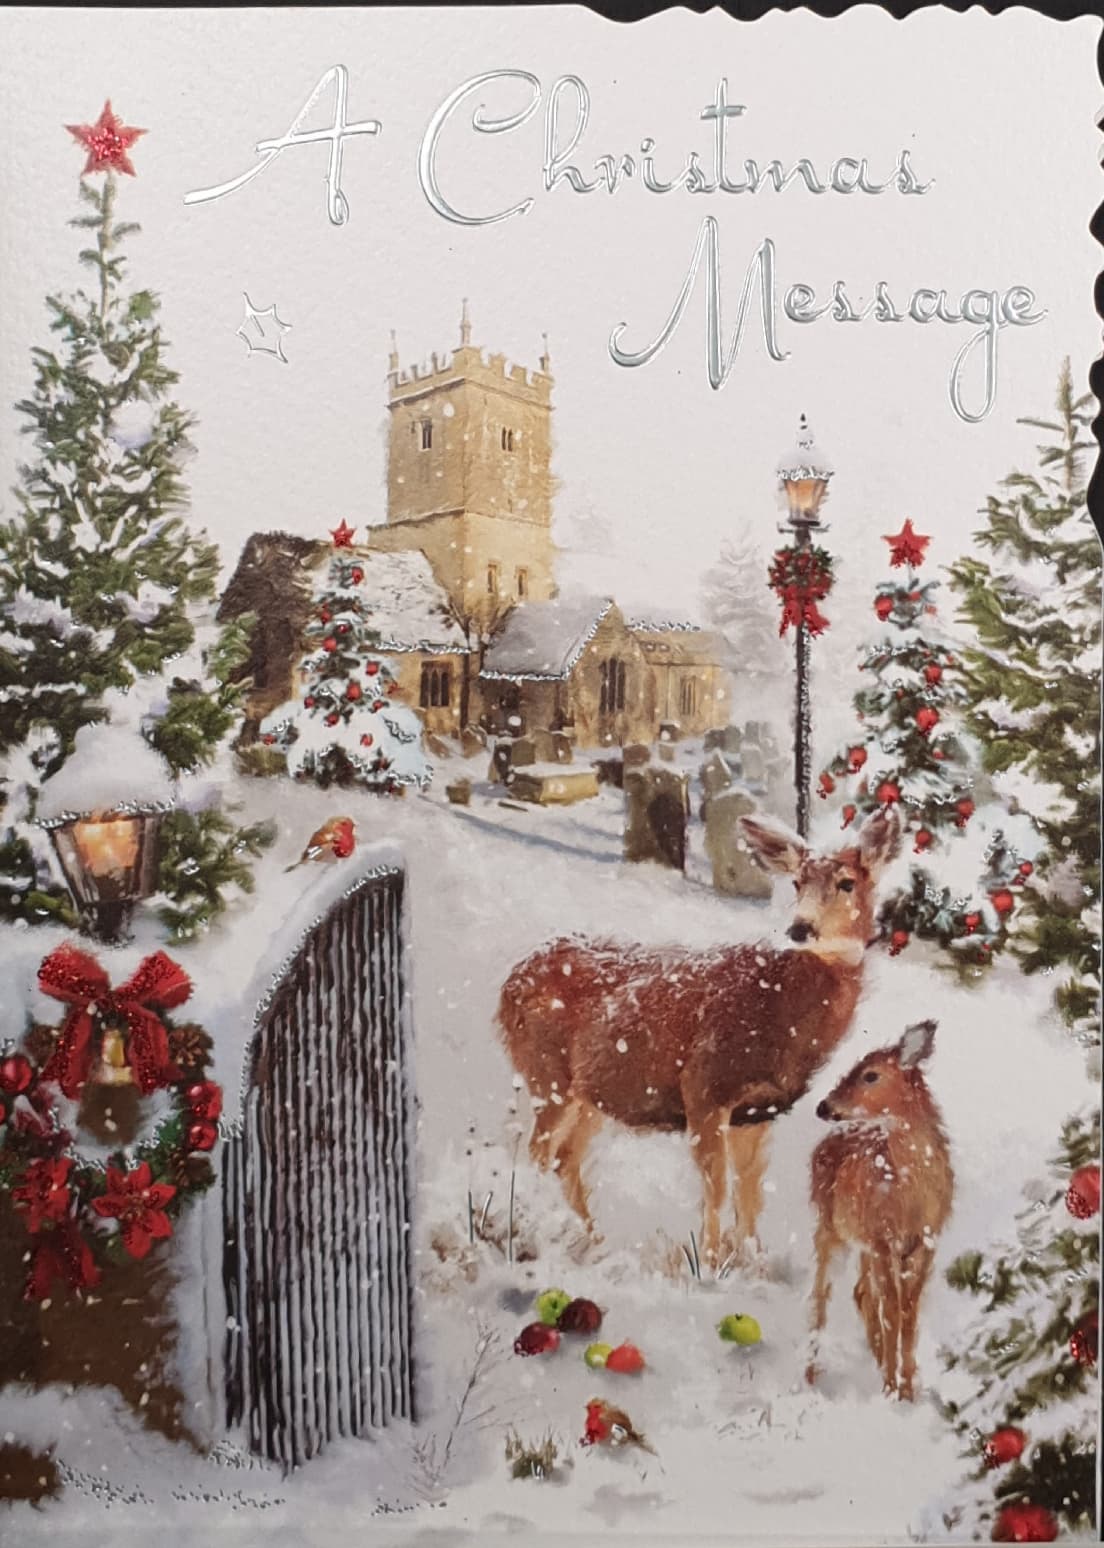 General Christmas Card - A Christmas Message / Deer in The Snow Near Church